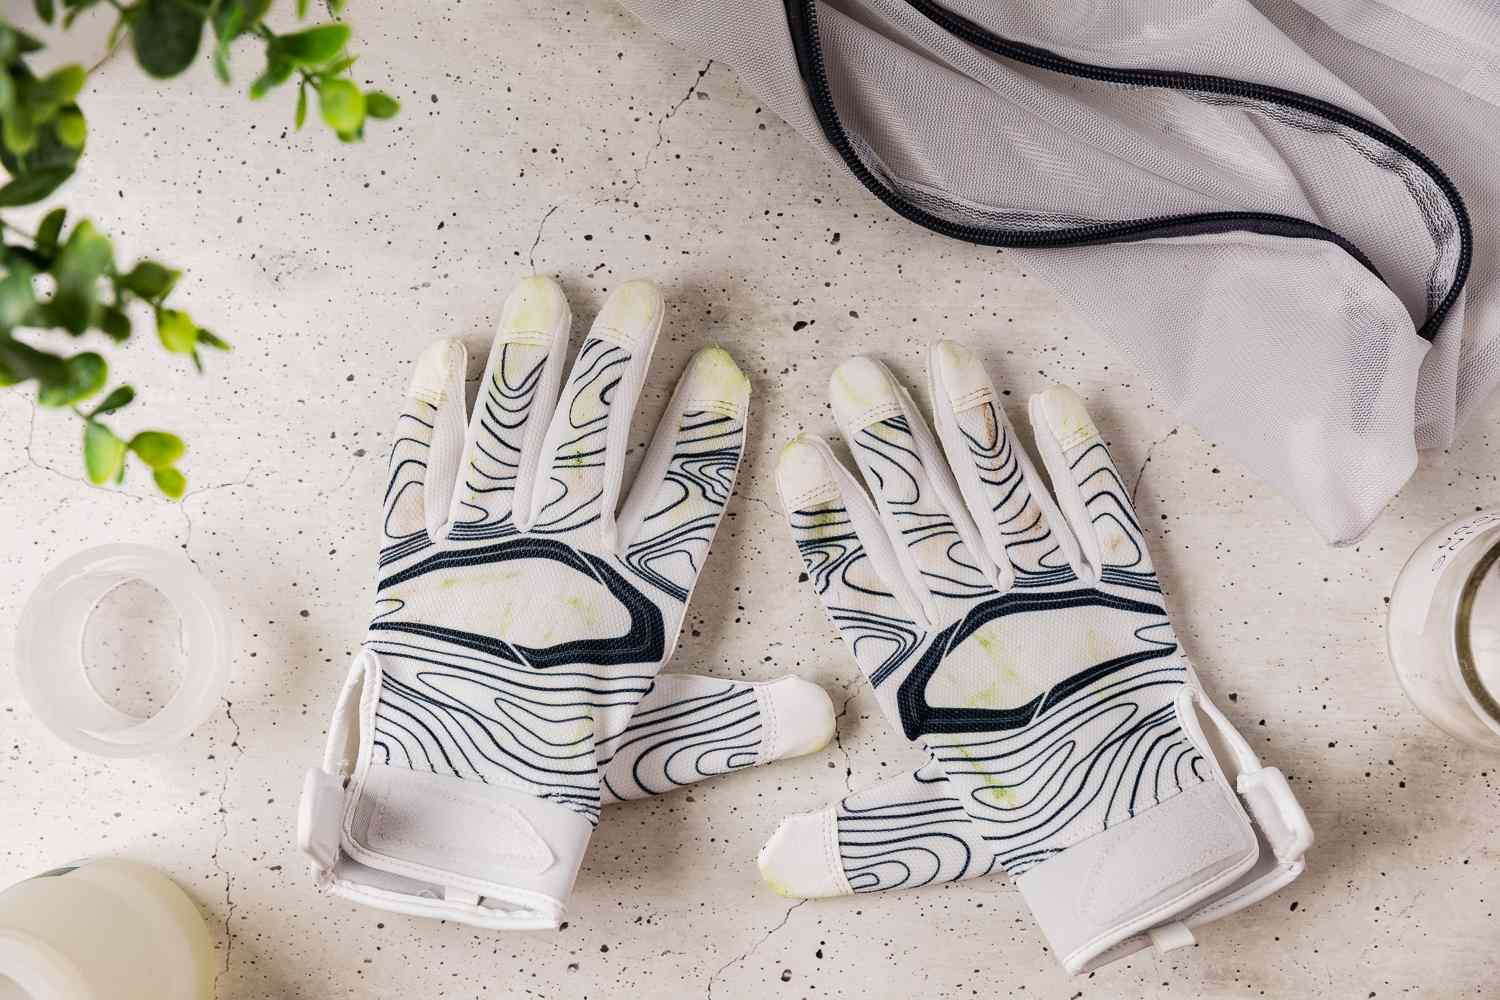 How to Clean Smelly Football Gloves?